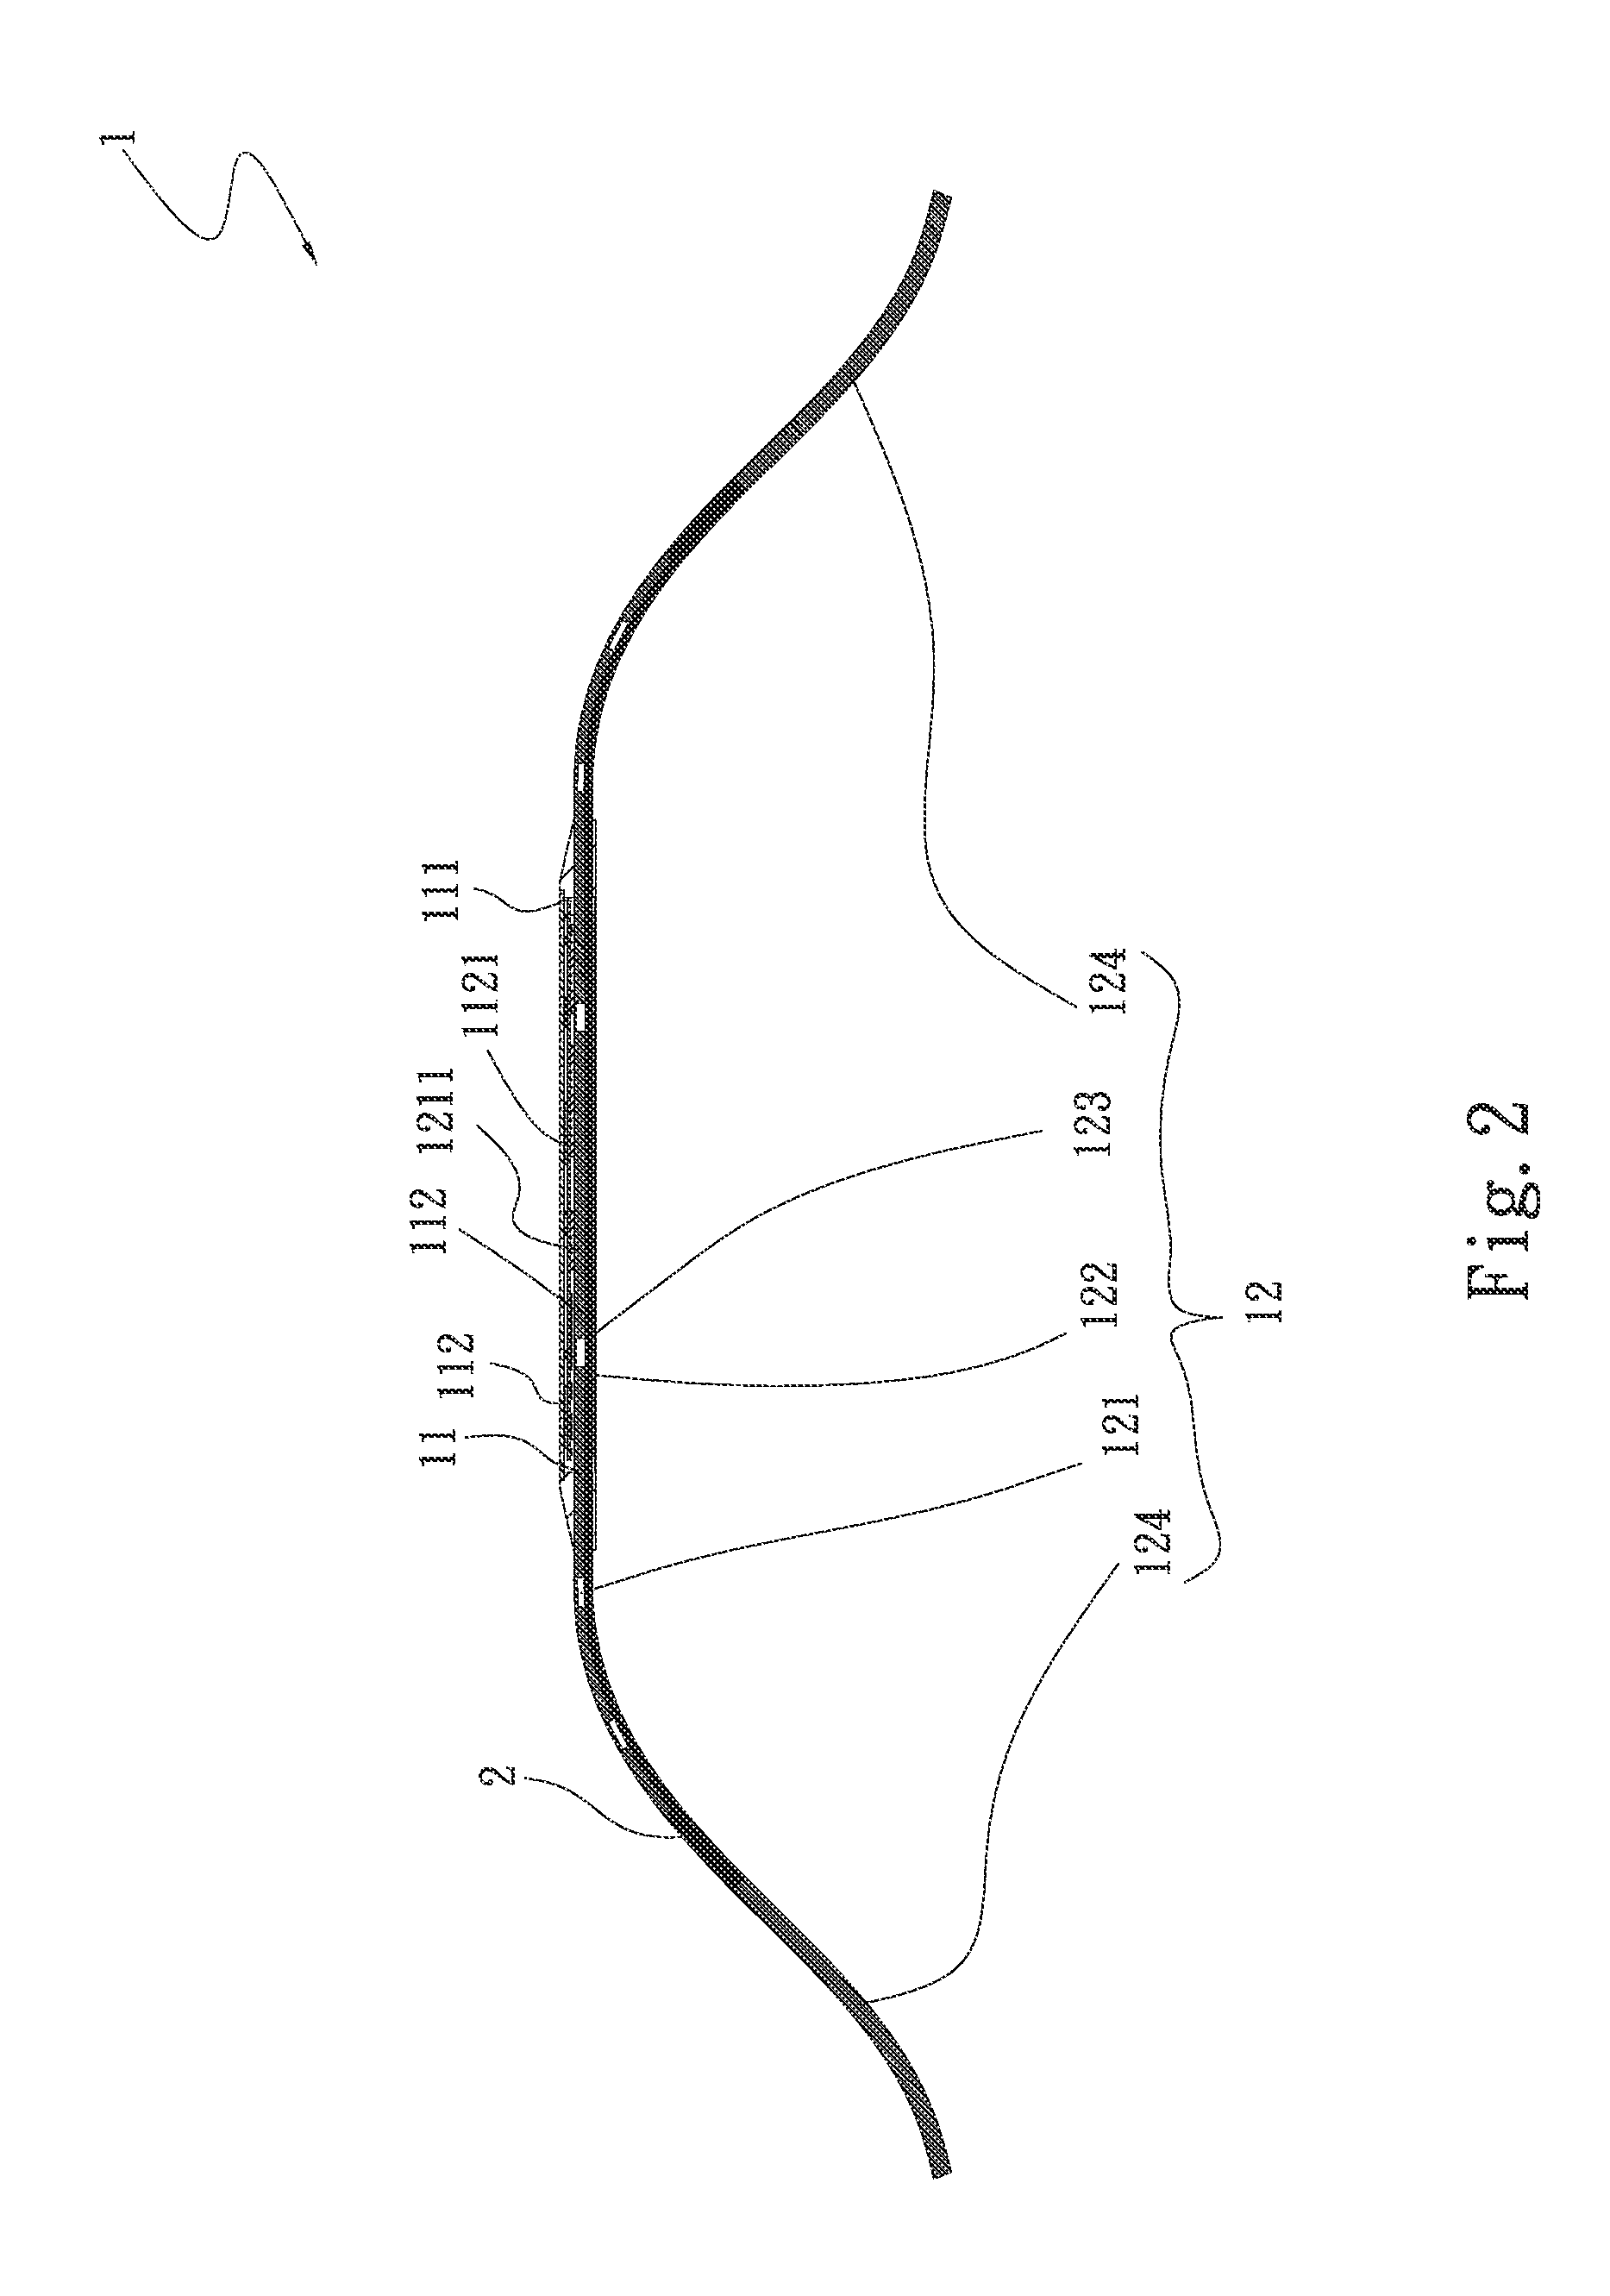 Heat dissipation structure for wearable mobile device